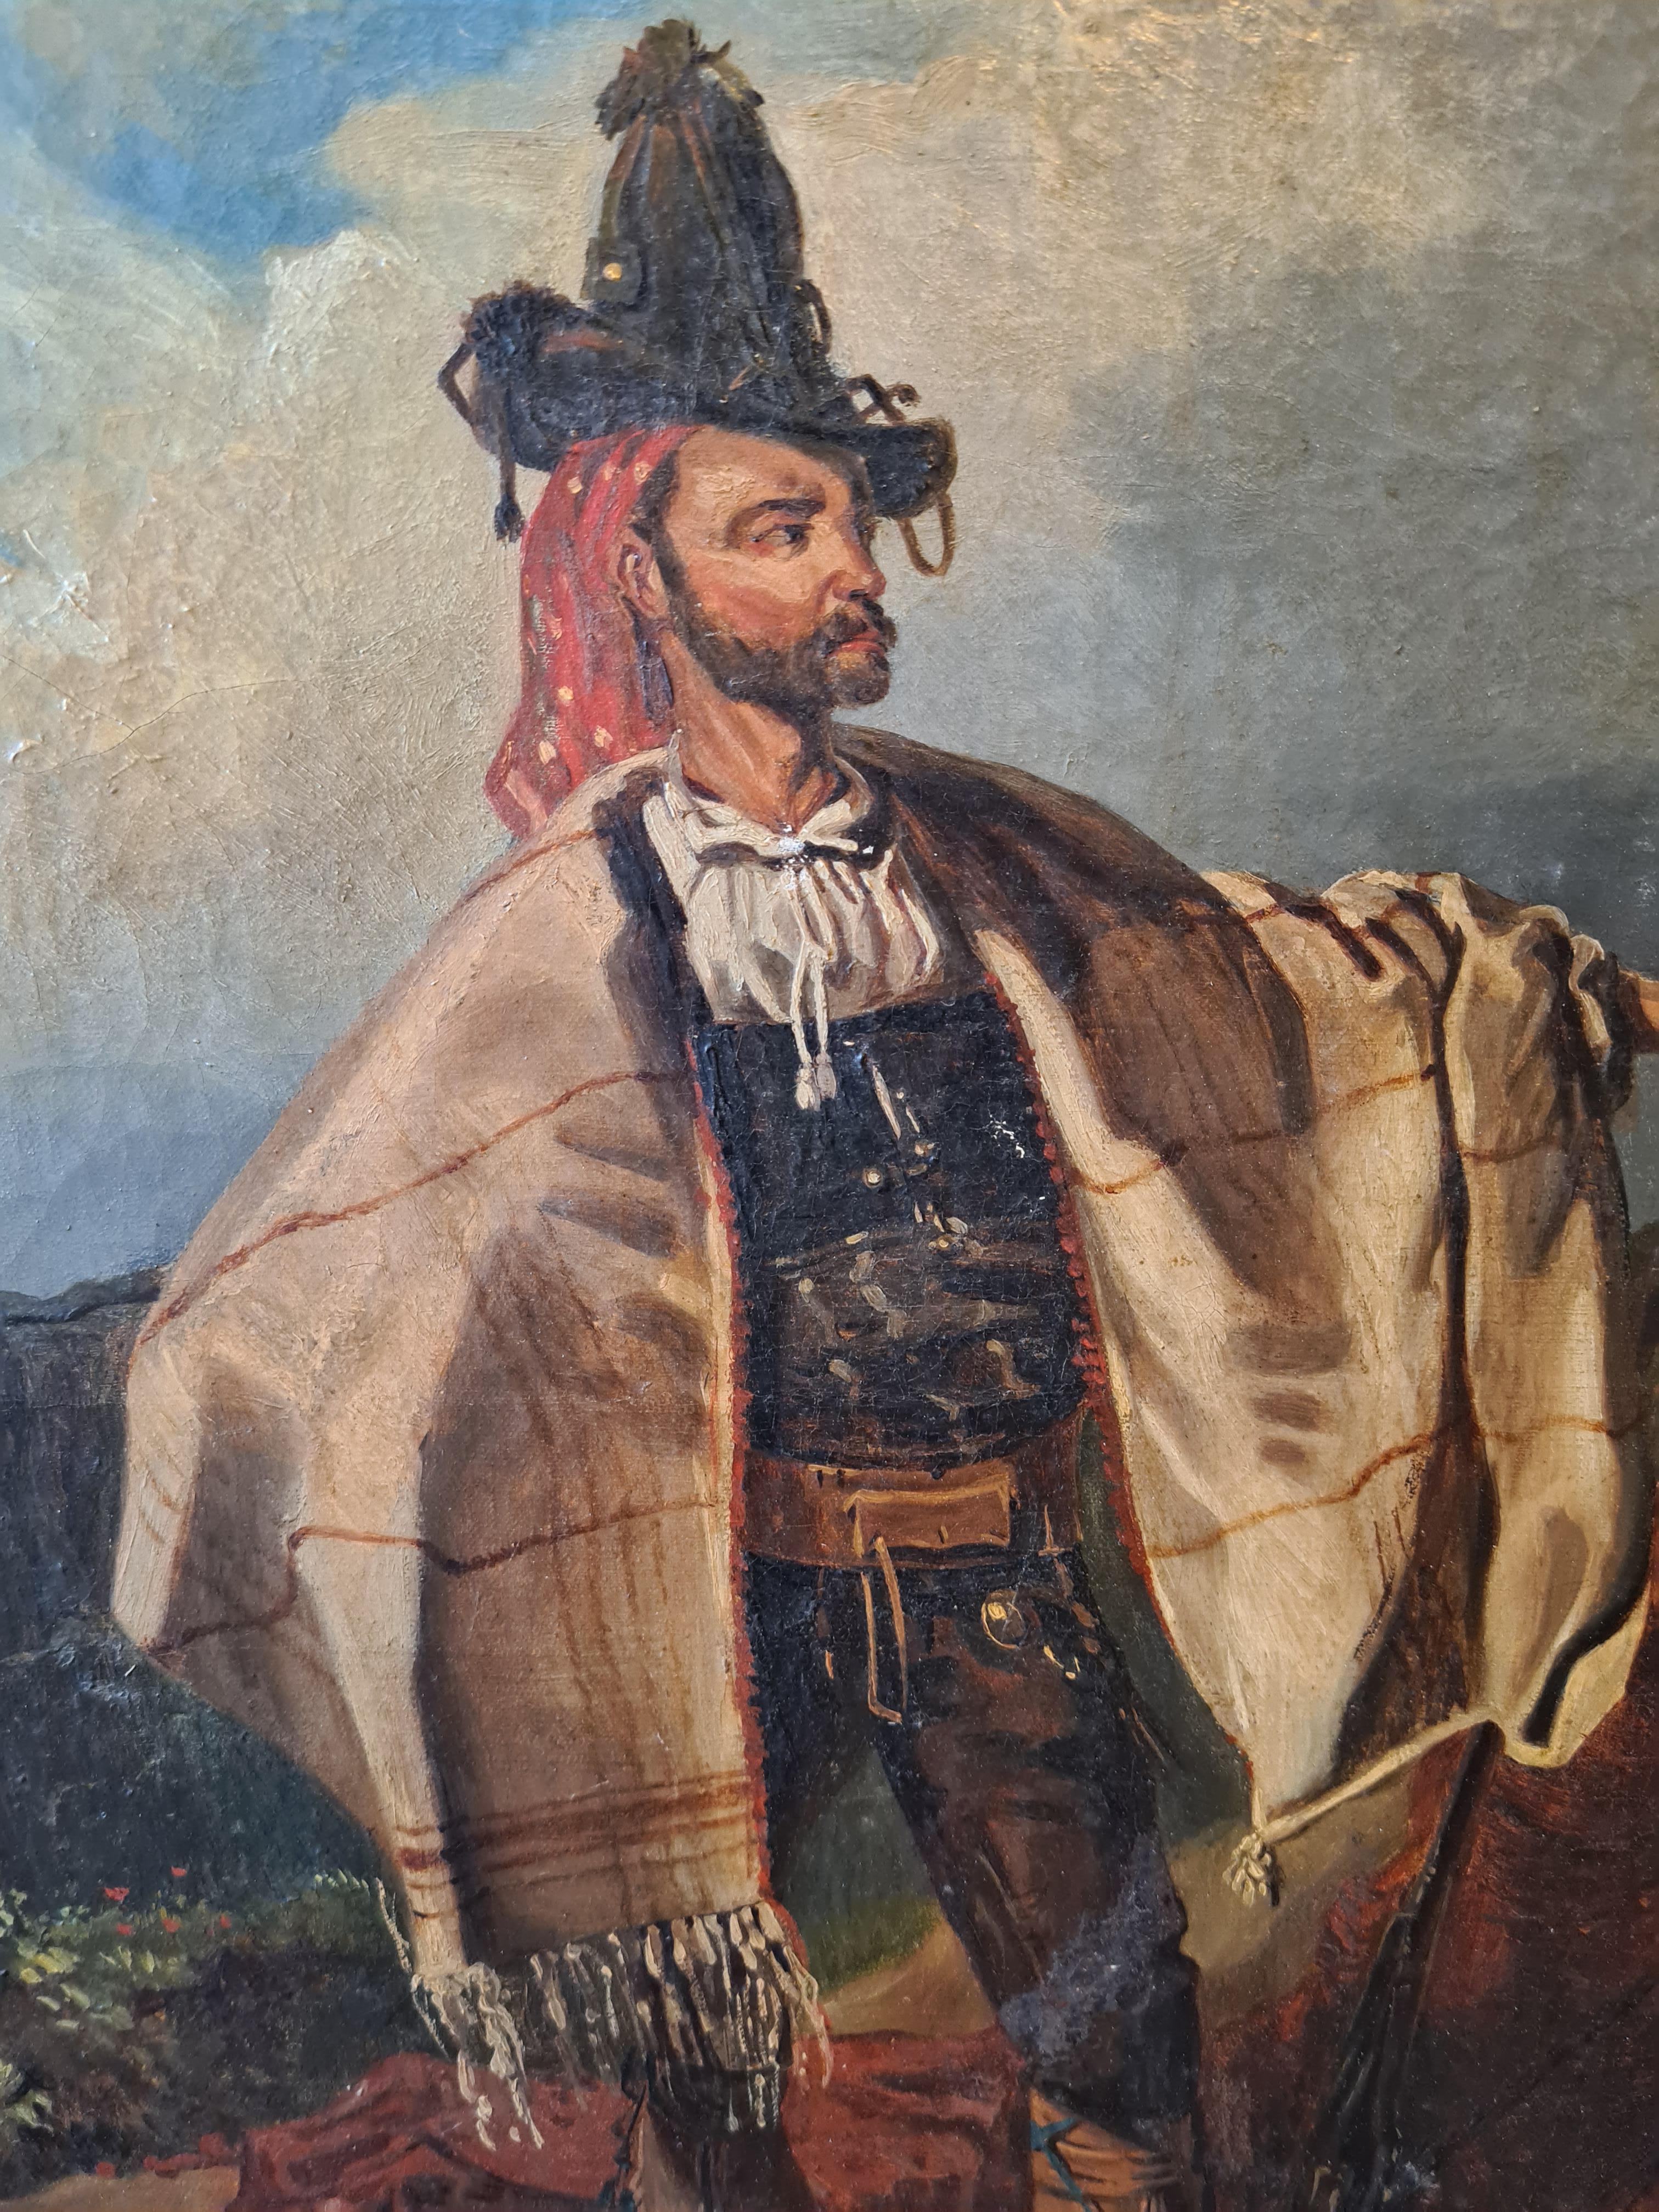 French Mid 19th Century Portrait of an Italian Brigand - Painting by Léon Cogniet